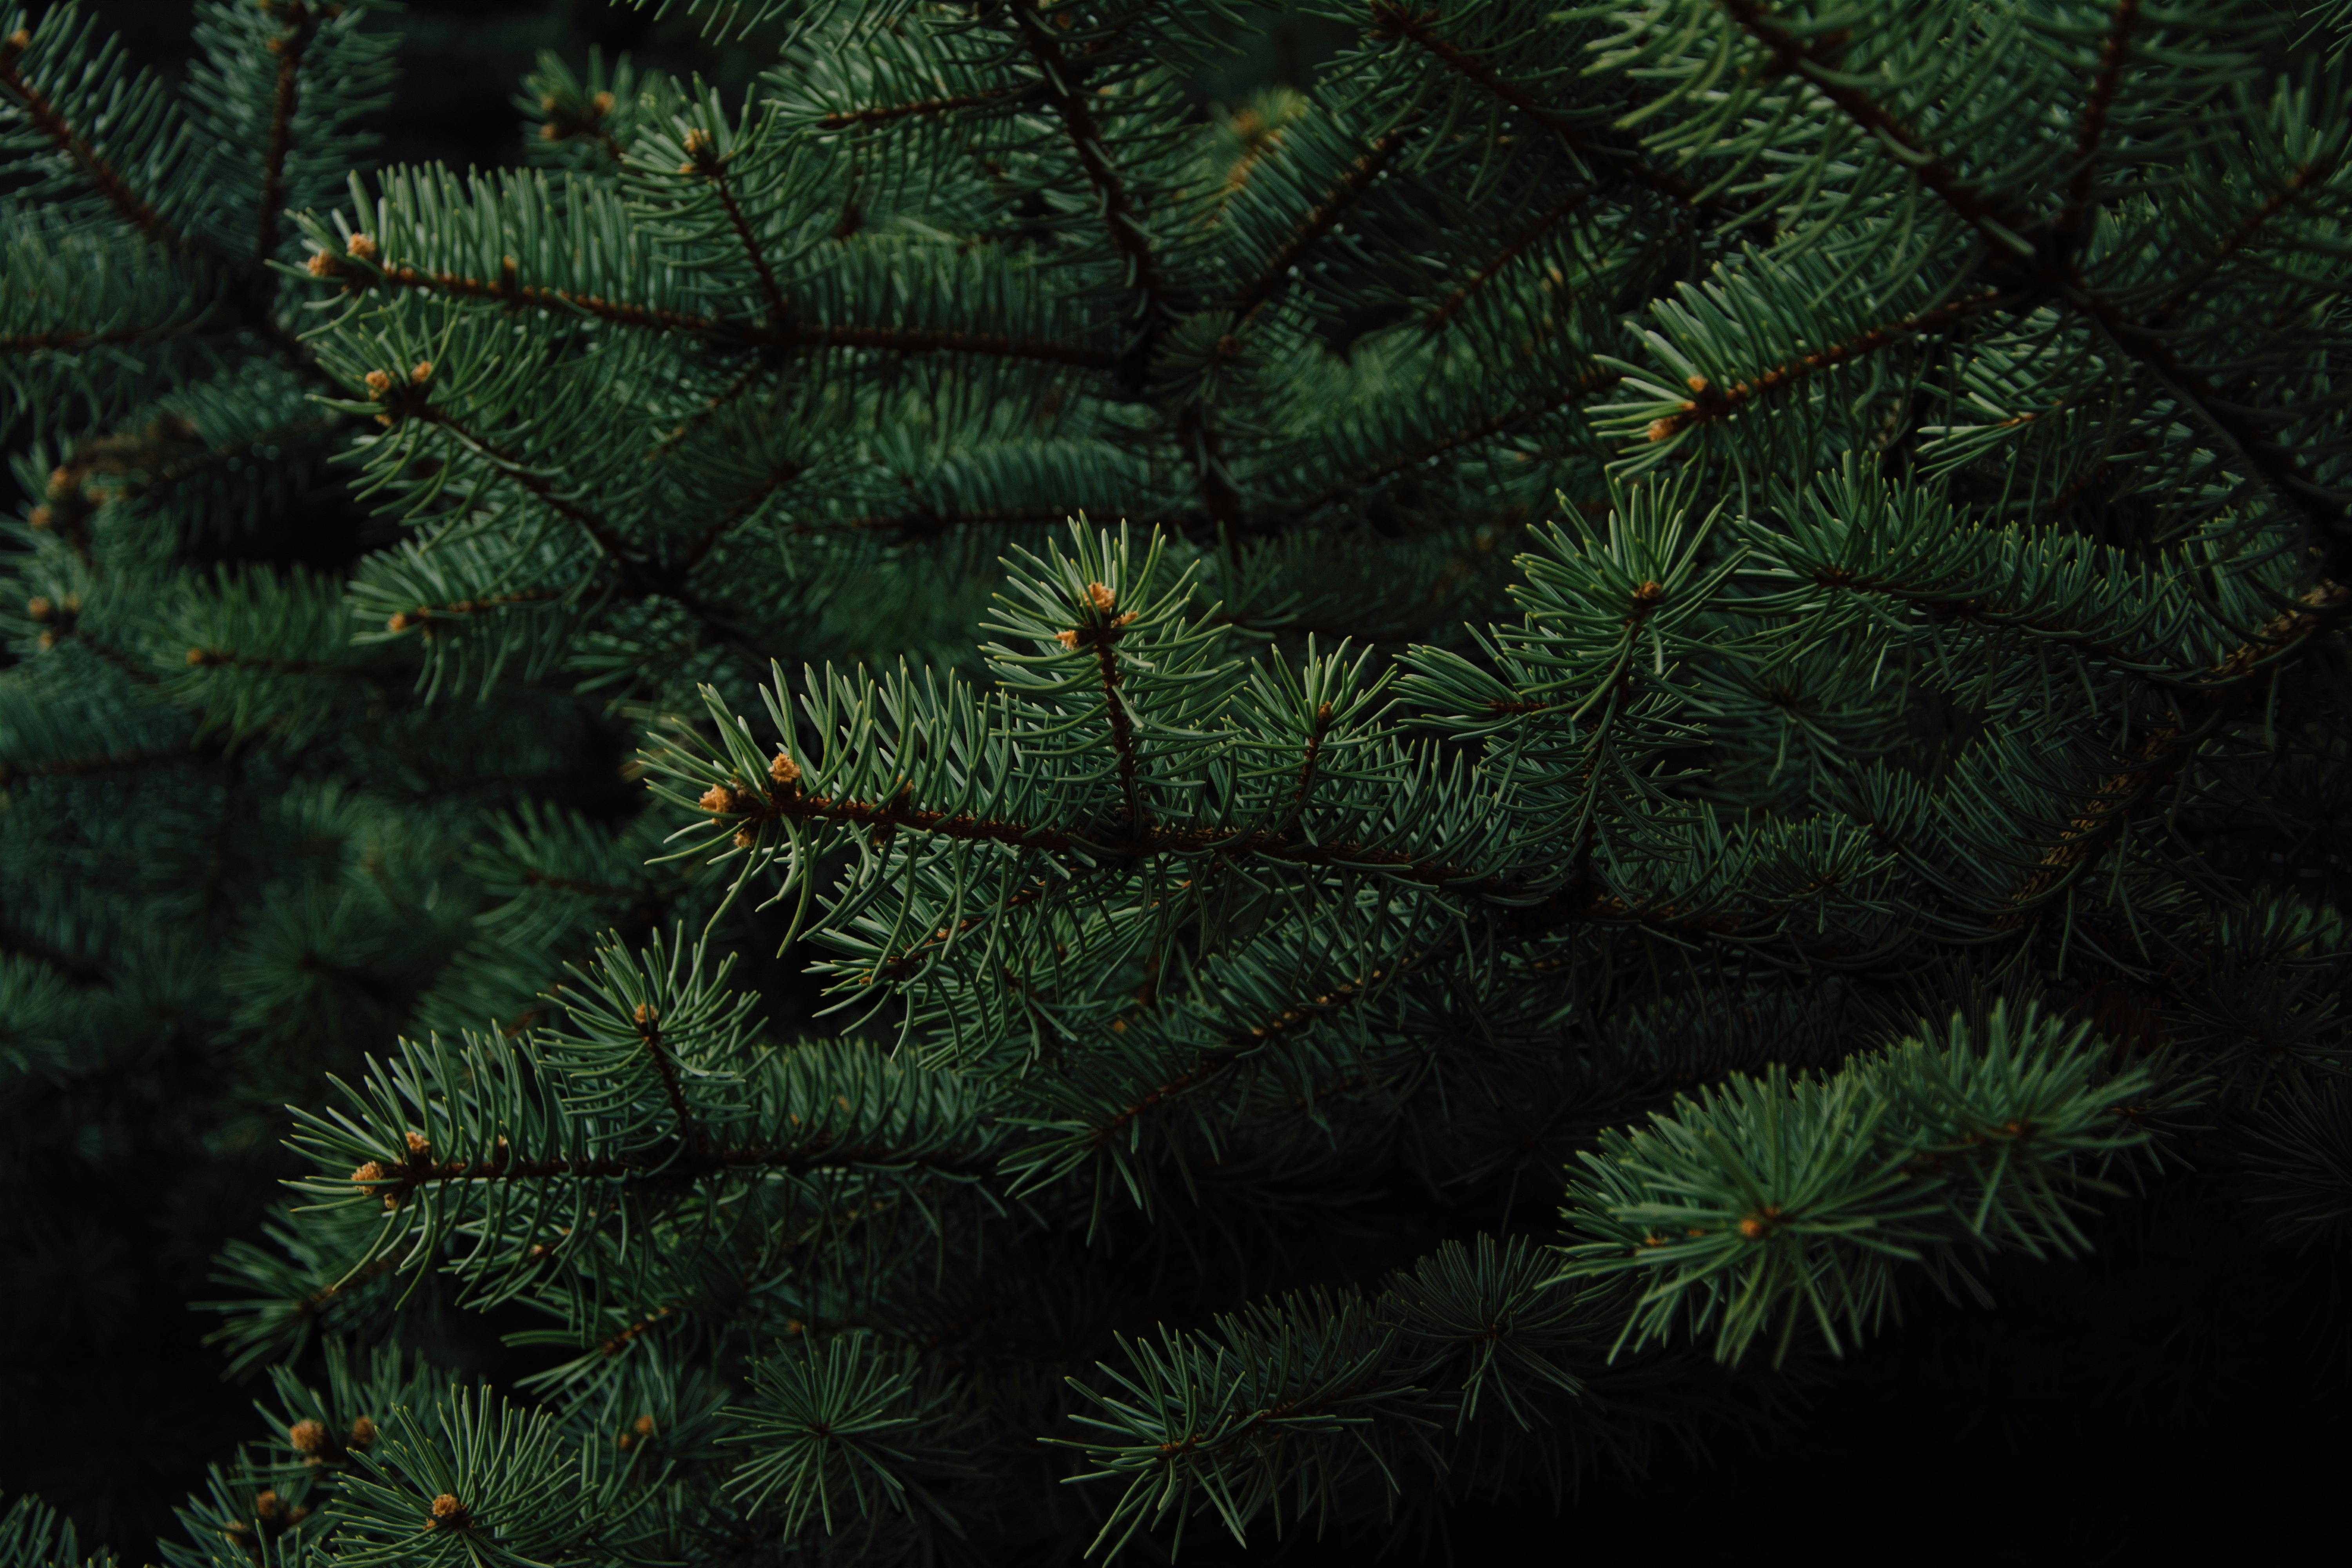 Evergreen Photos Download The BEST Free Evergreen Stock Photos  HD Images